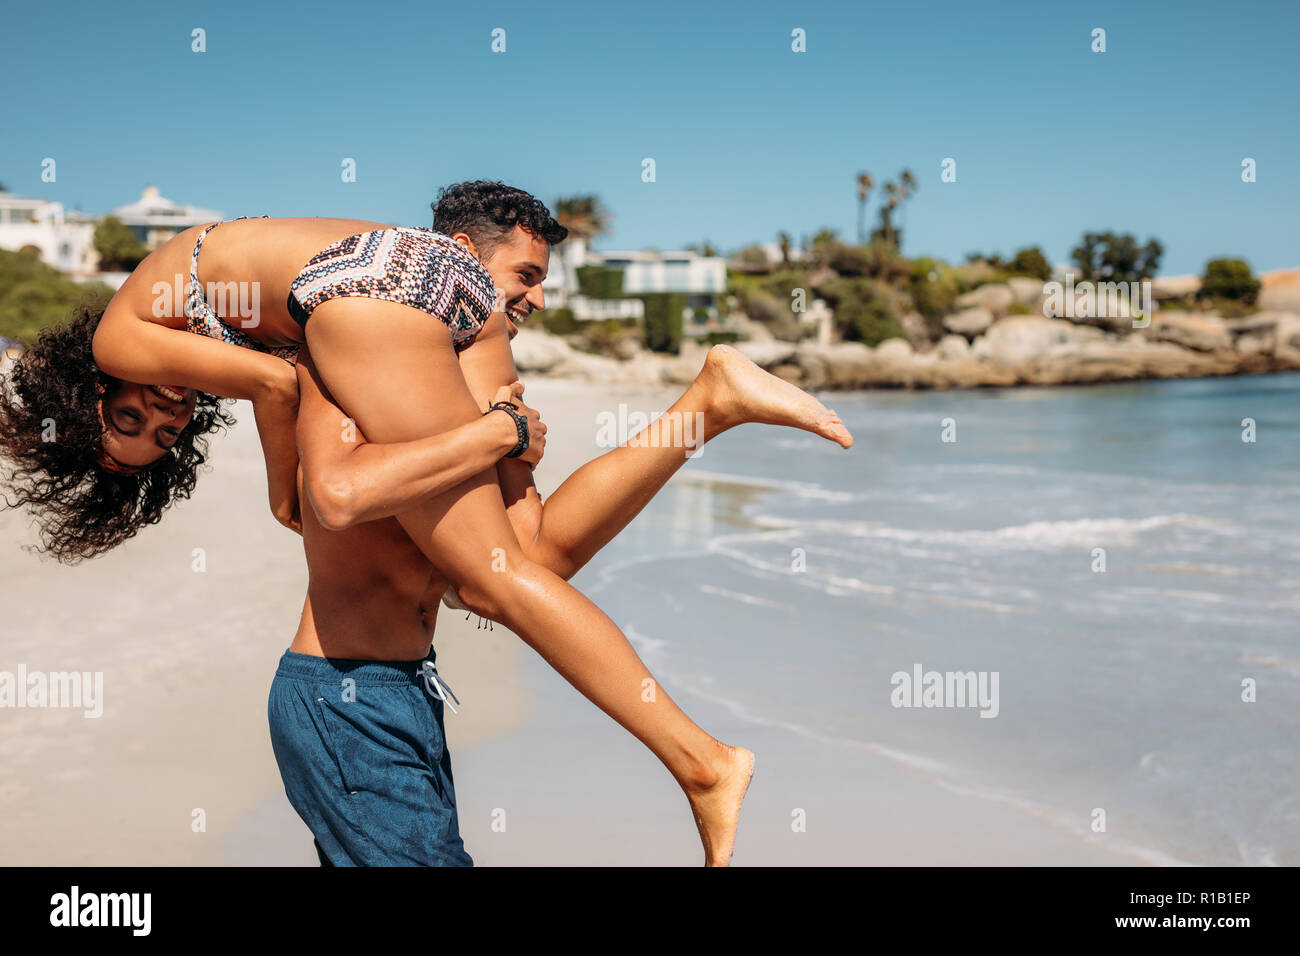 Man walking on beach carrying his girlfriend on his shoulder. Young tourist couple in romantic mood enjoying on the beach. Stock Photo